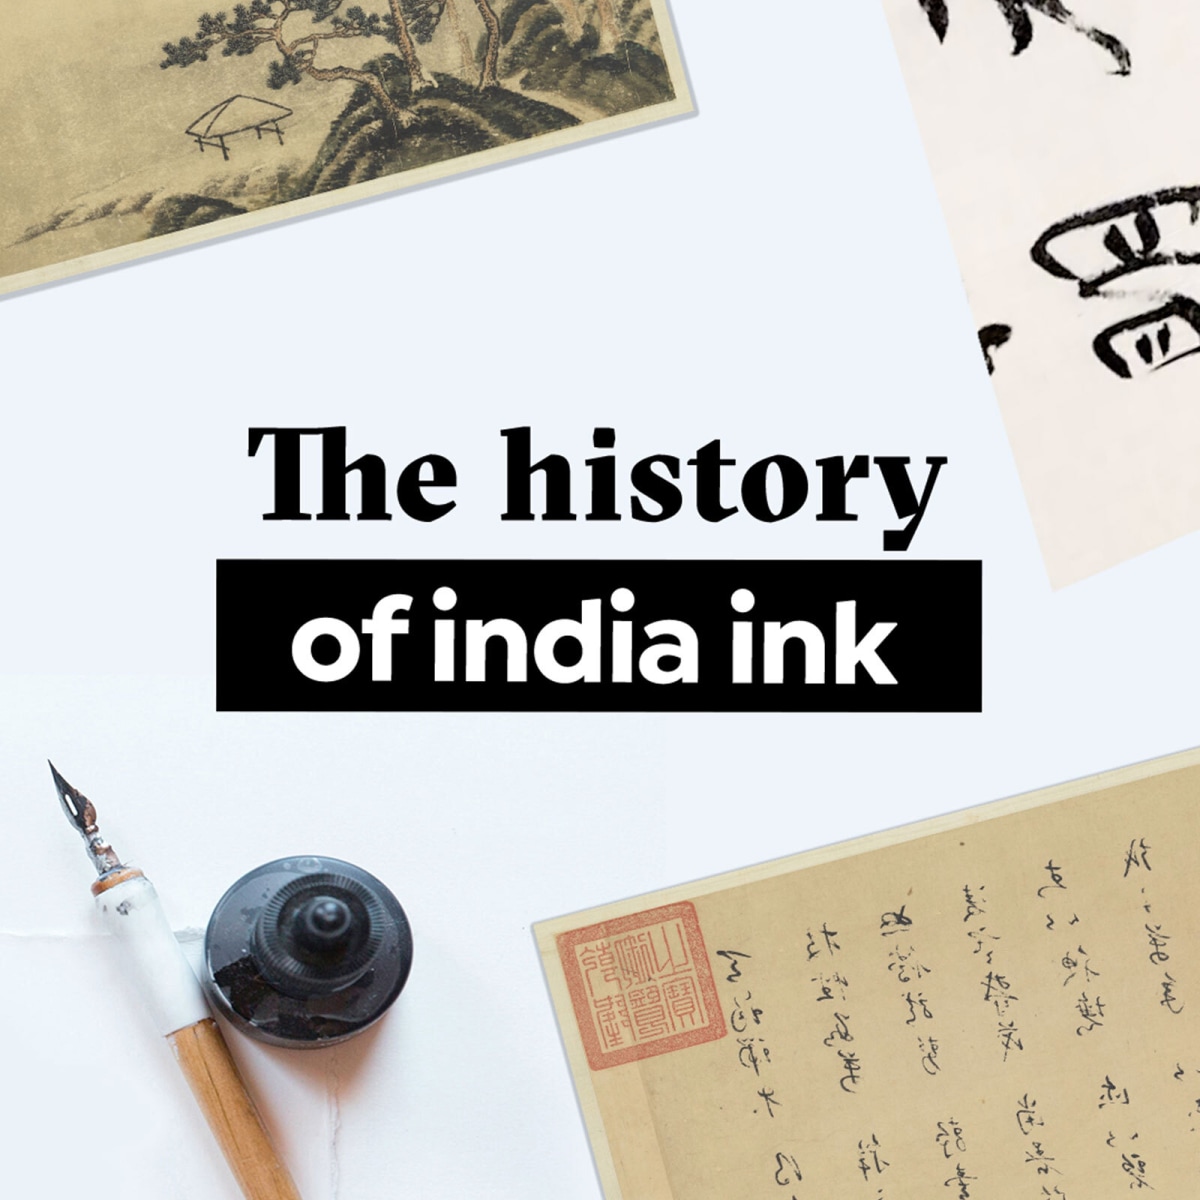 The History of India Ink: From Drunk Poets to Sumi-e